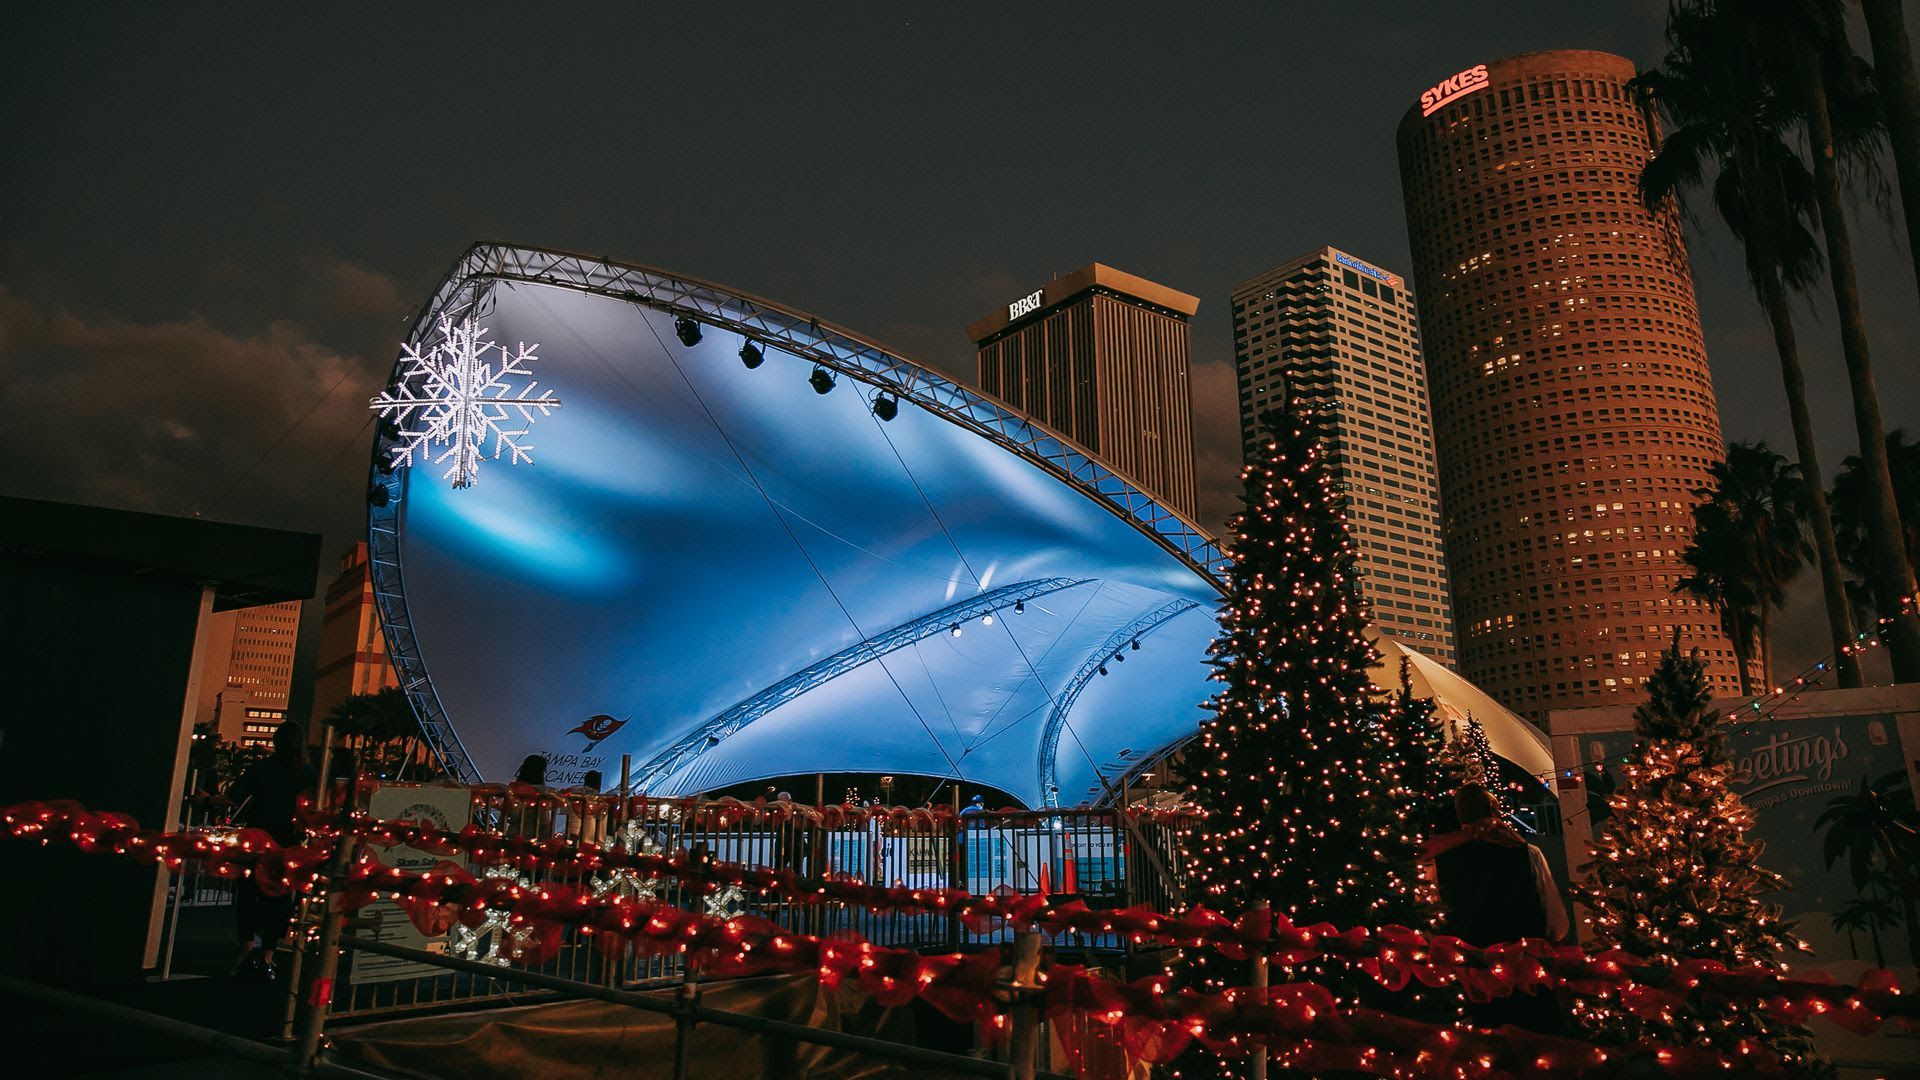 Downtown Tampa's Winter Village ice rink lit up with holiday trees and lights.